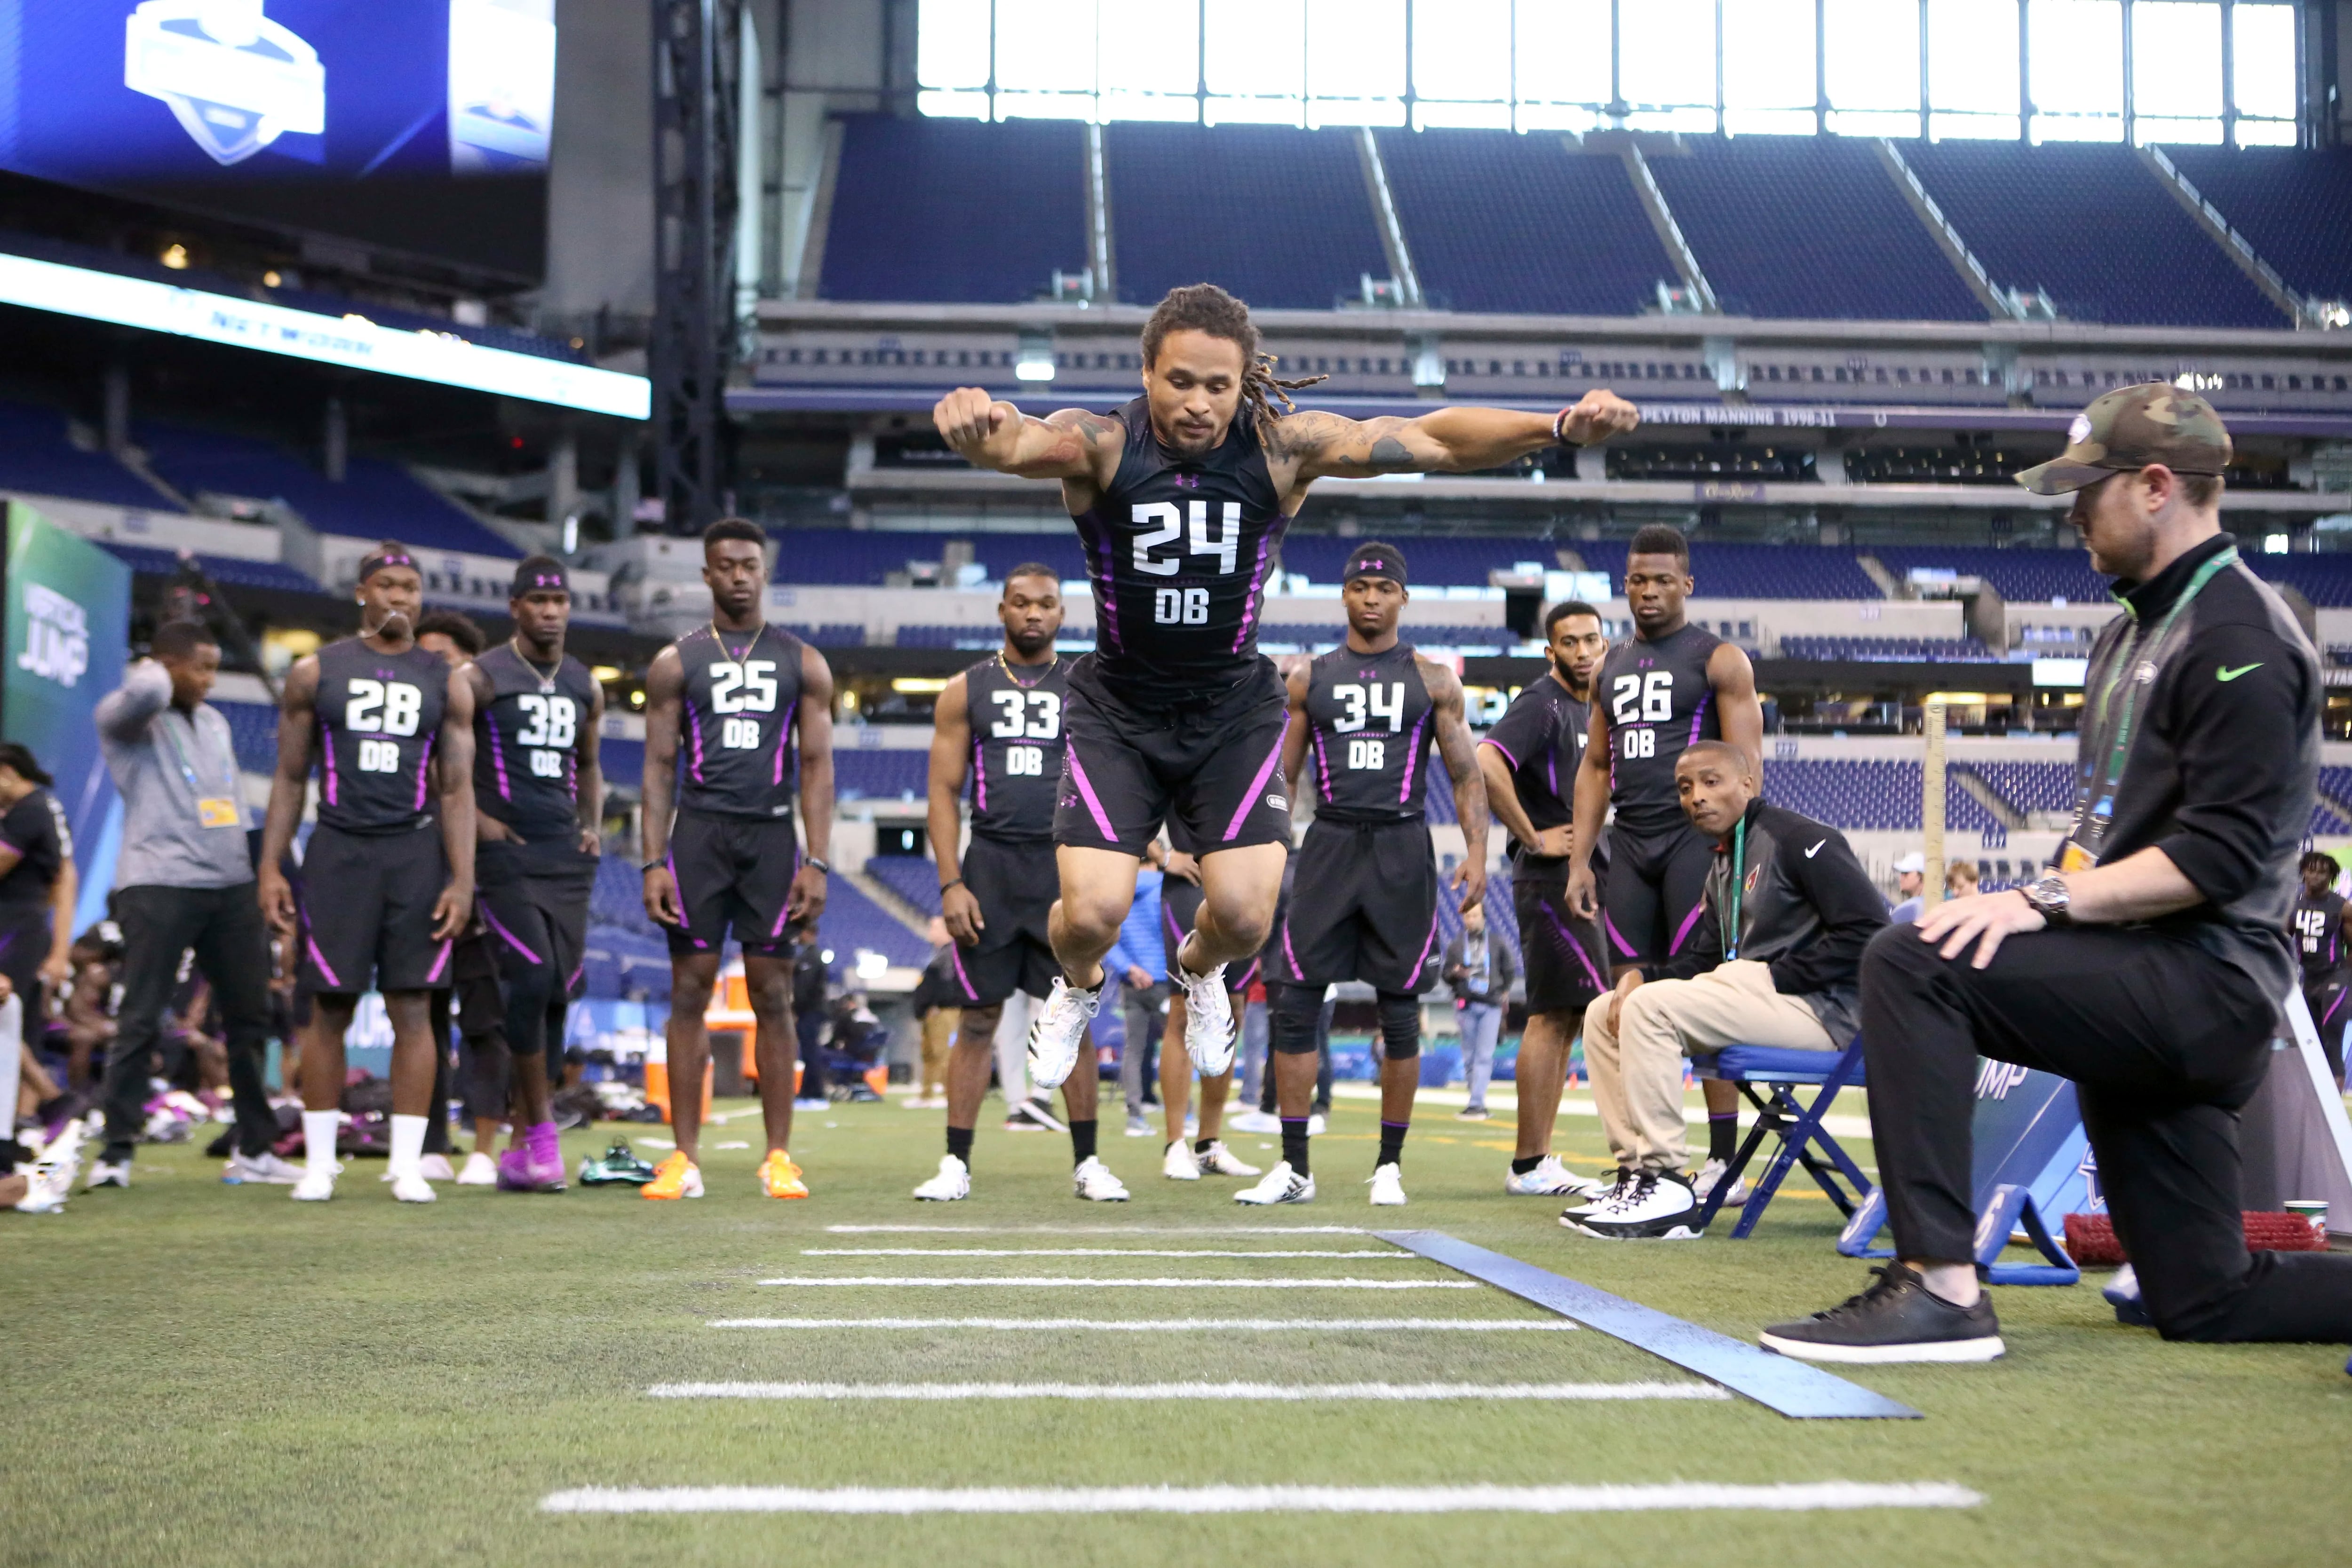 Pittsburgh defensive back Avonte Maddox participates in the Broad Jump at the 2018 NFL Scouting Combine on Monday, March 5, 2018, in Indianapolis. (AP Photo/Gregory Payan)